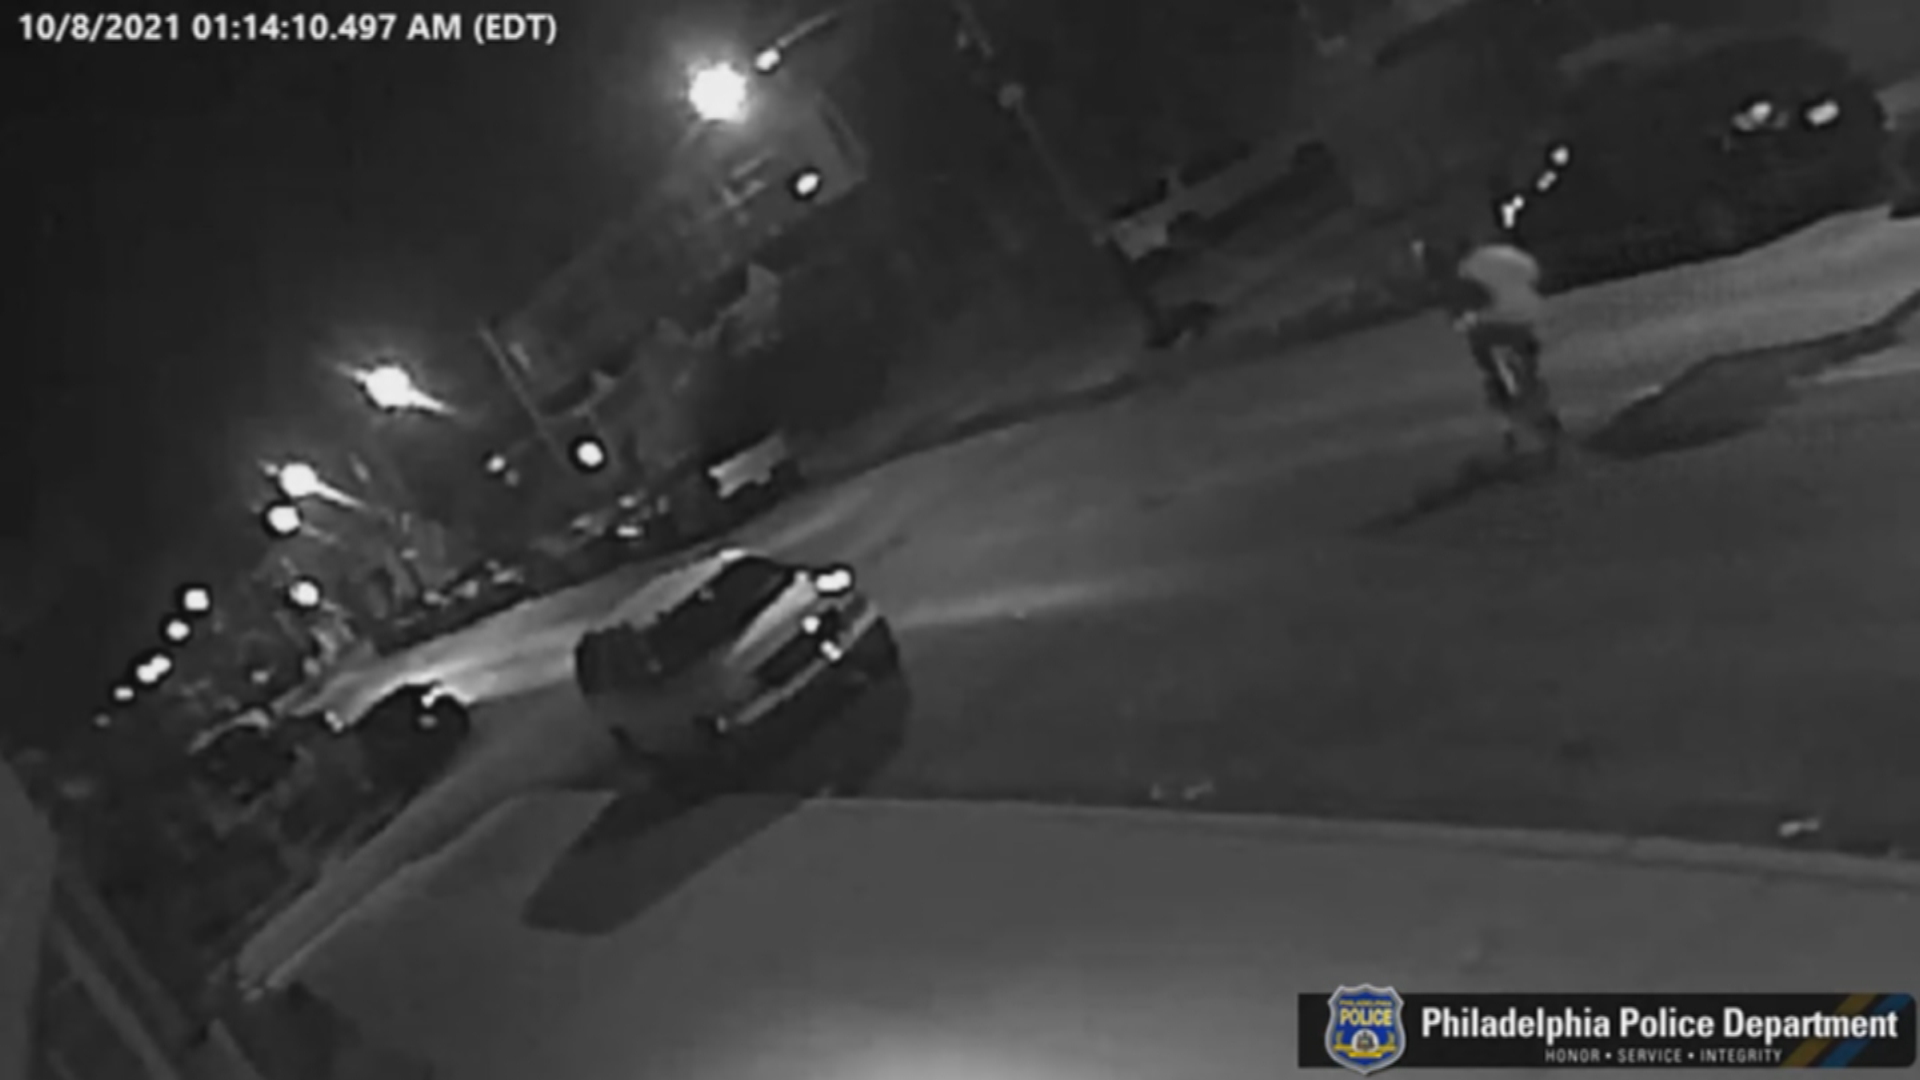 Police Release New Surveillance Video Of West Philadelphia Shooting From October 2021 – CBS Philly